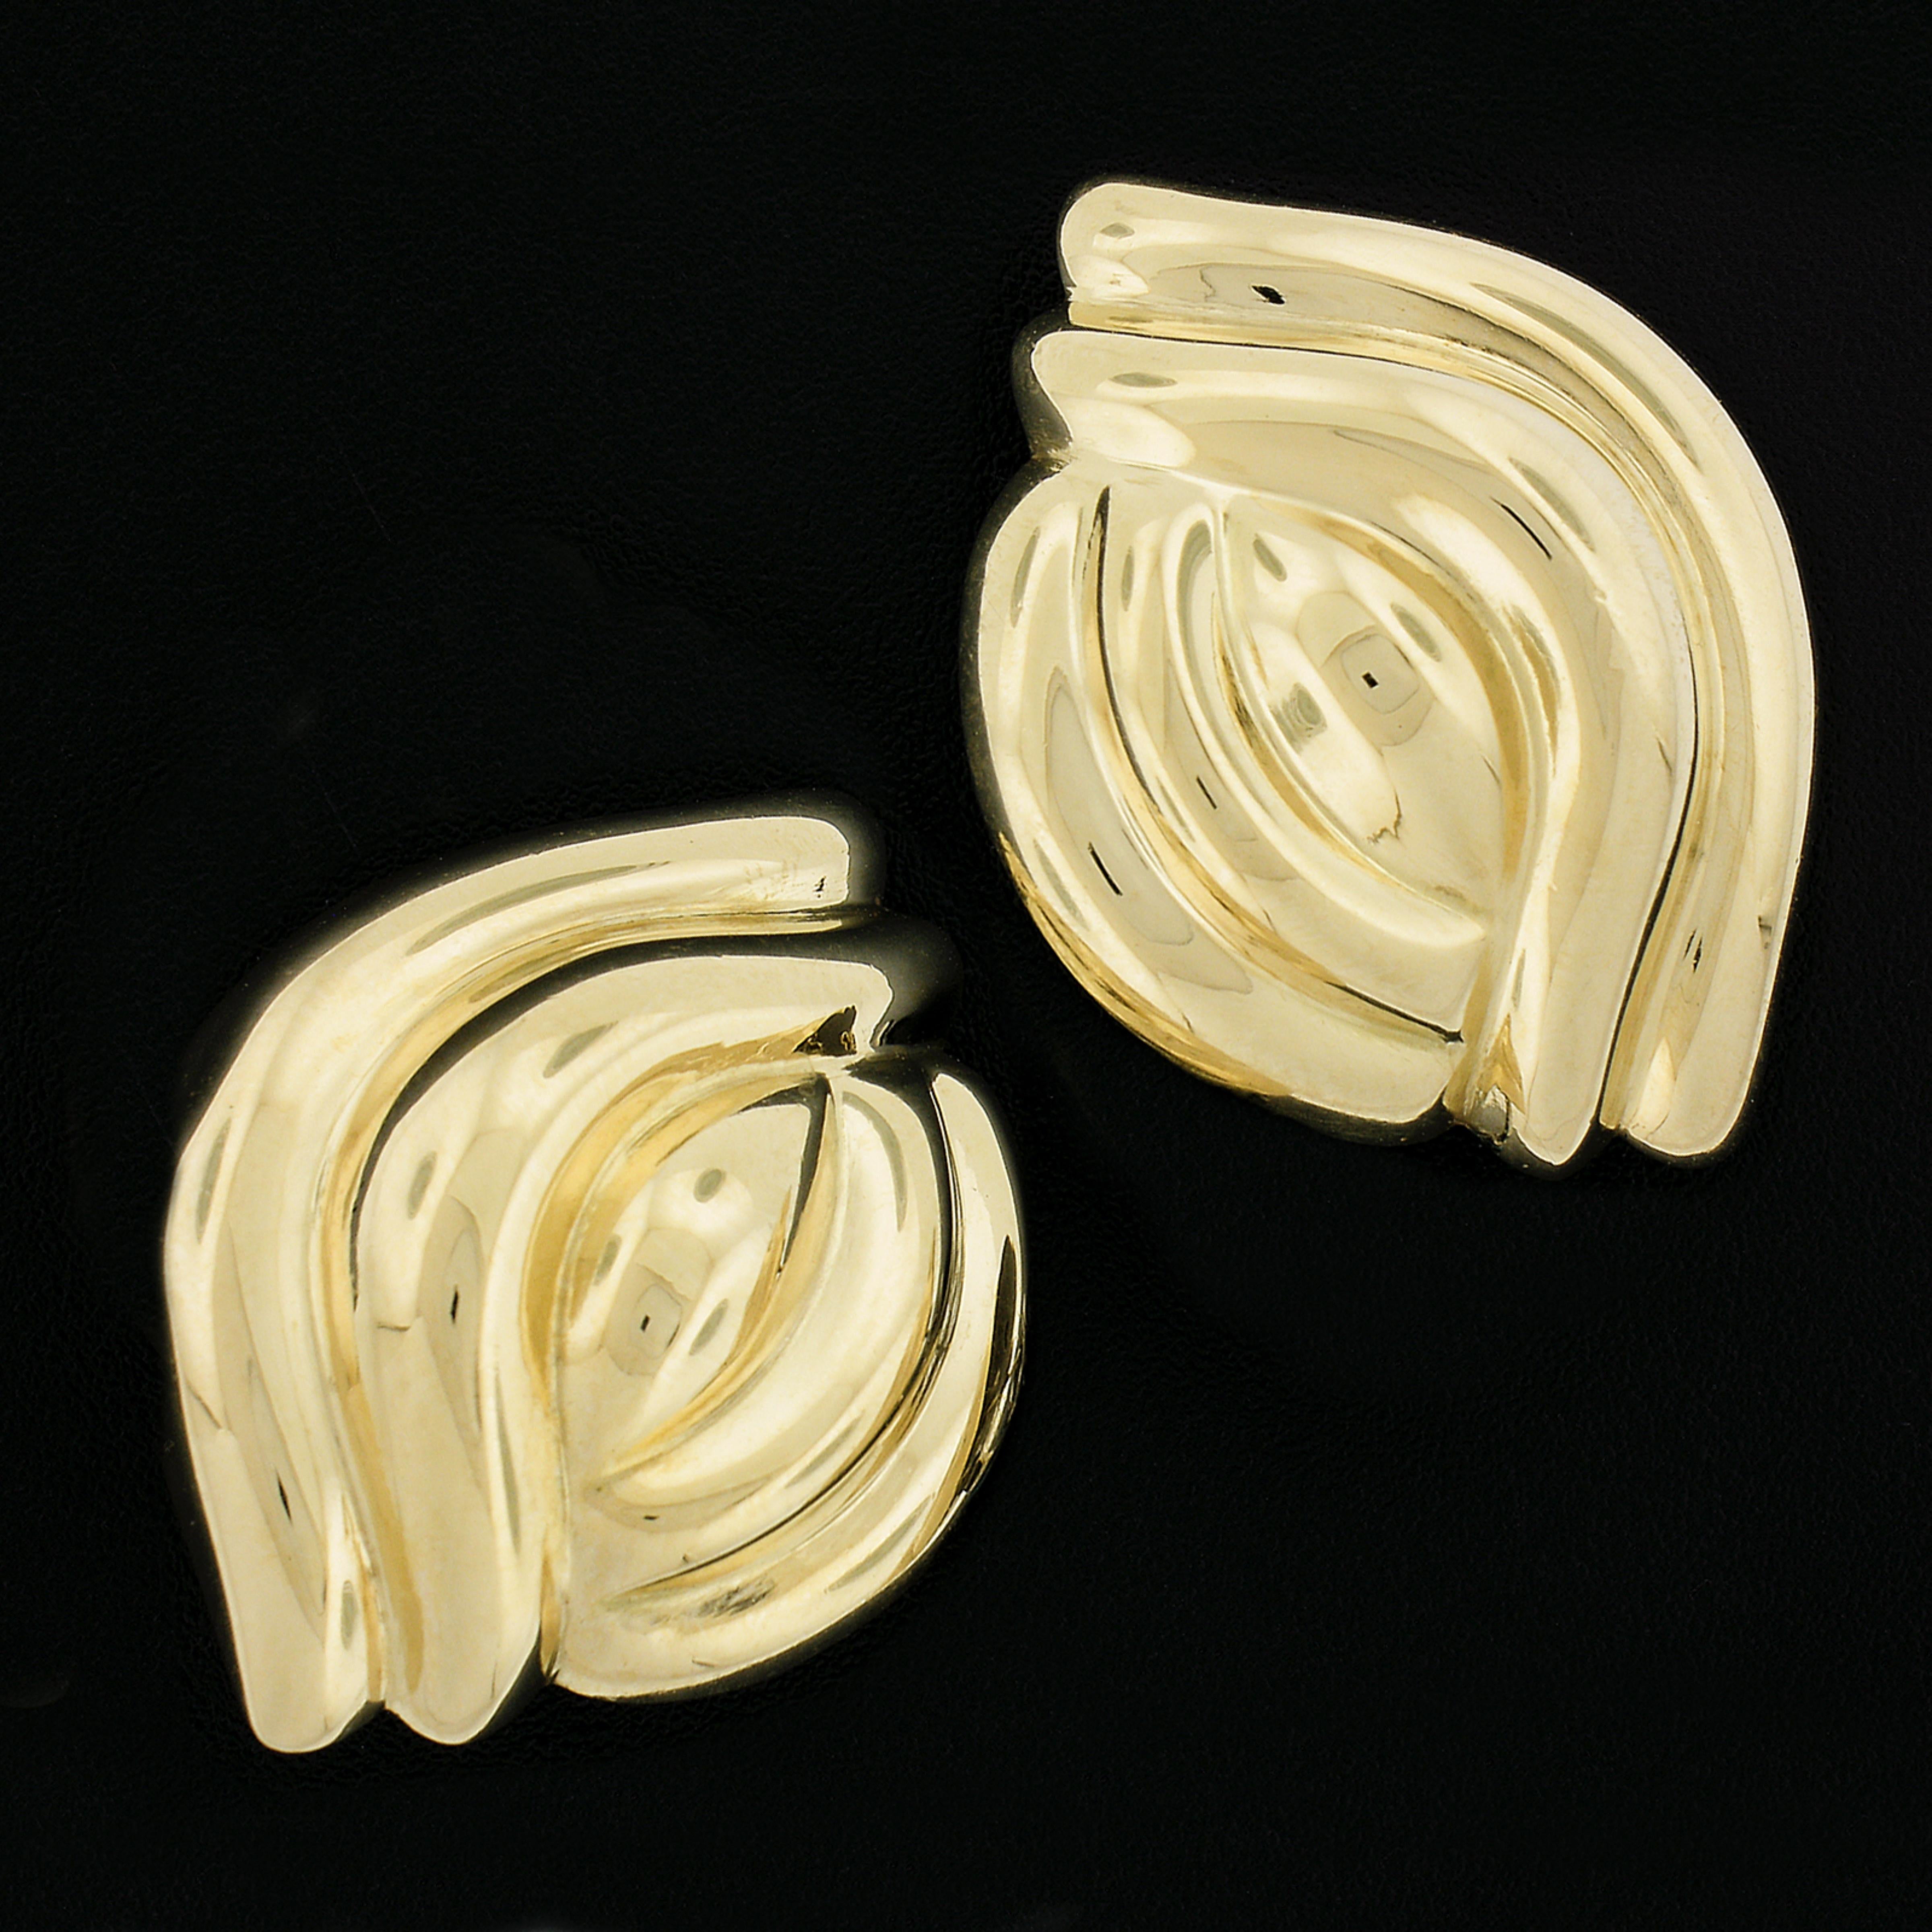 Material: Solid 18K Yellow Gold w/ White Gold Backs (Solid Gold Hollow Design)
Weight: 16.32 Grams
Backing: Posts w/ Omega Closures (Pierced ears are required.)
Width: 25.8mm (1